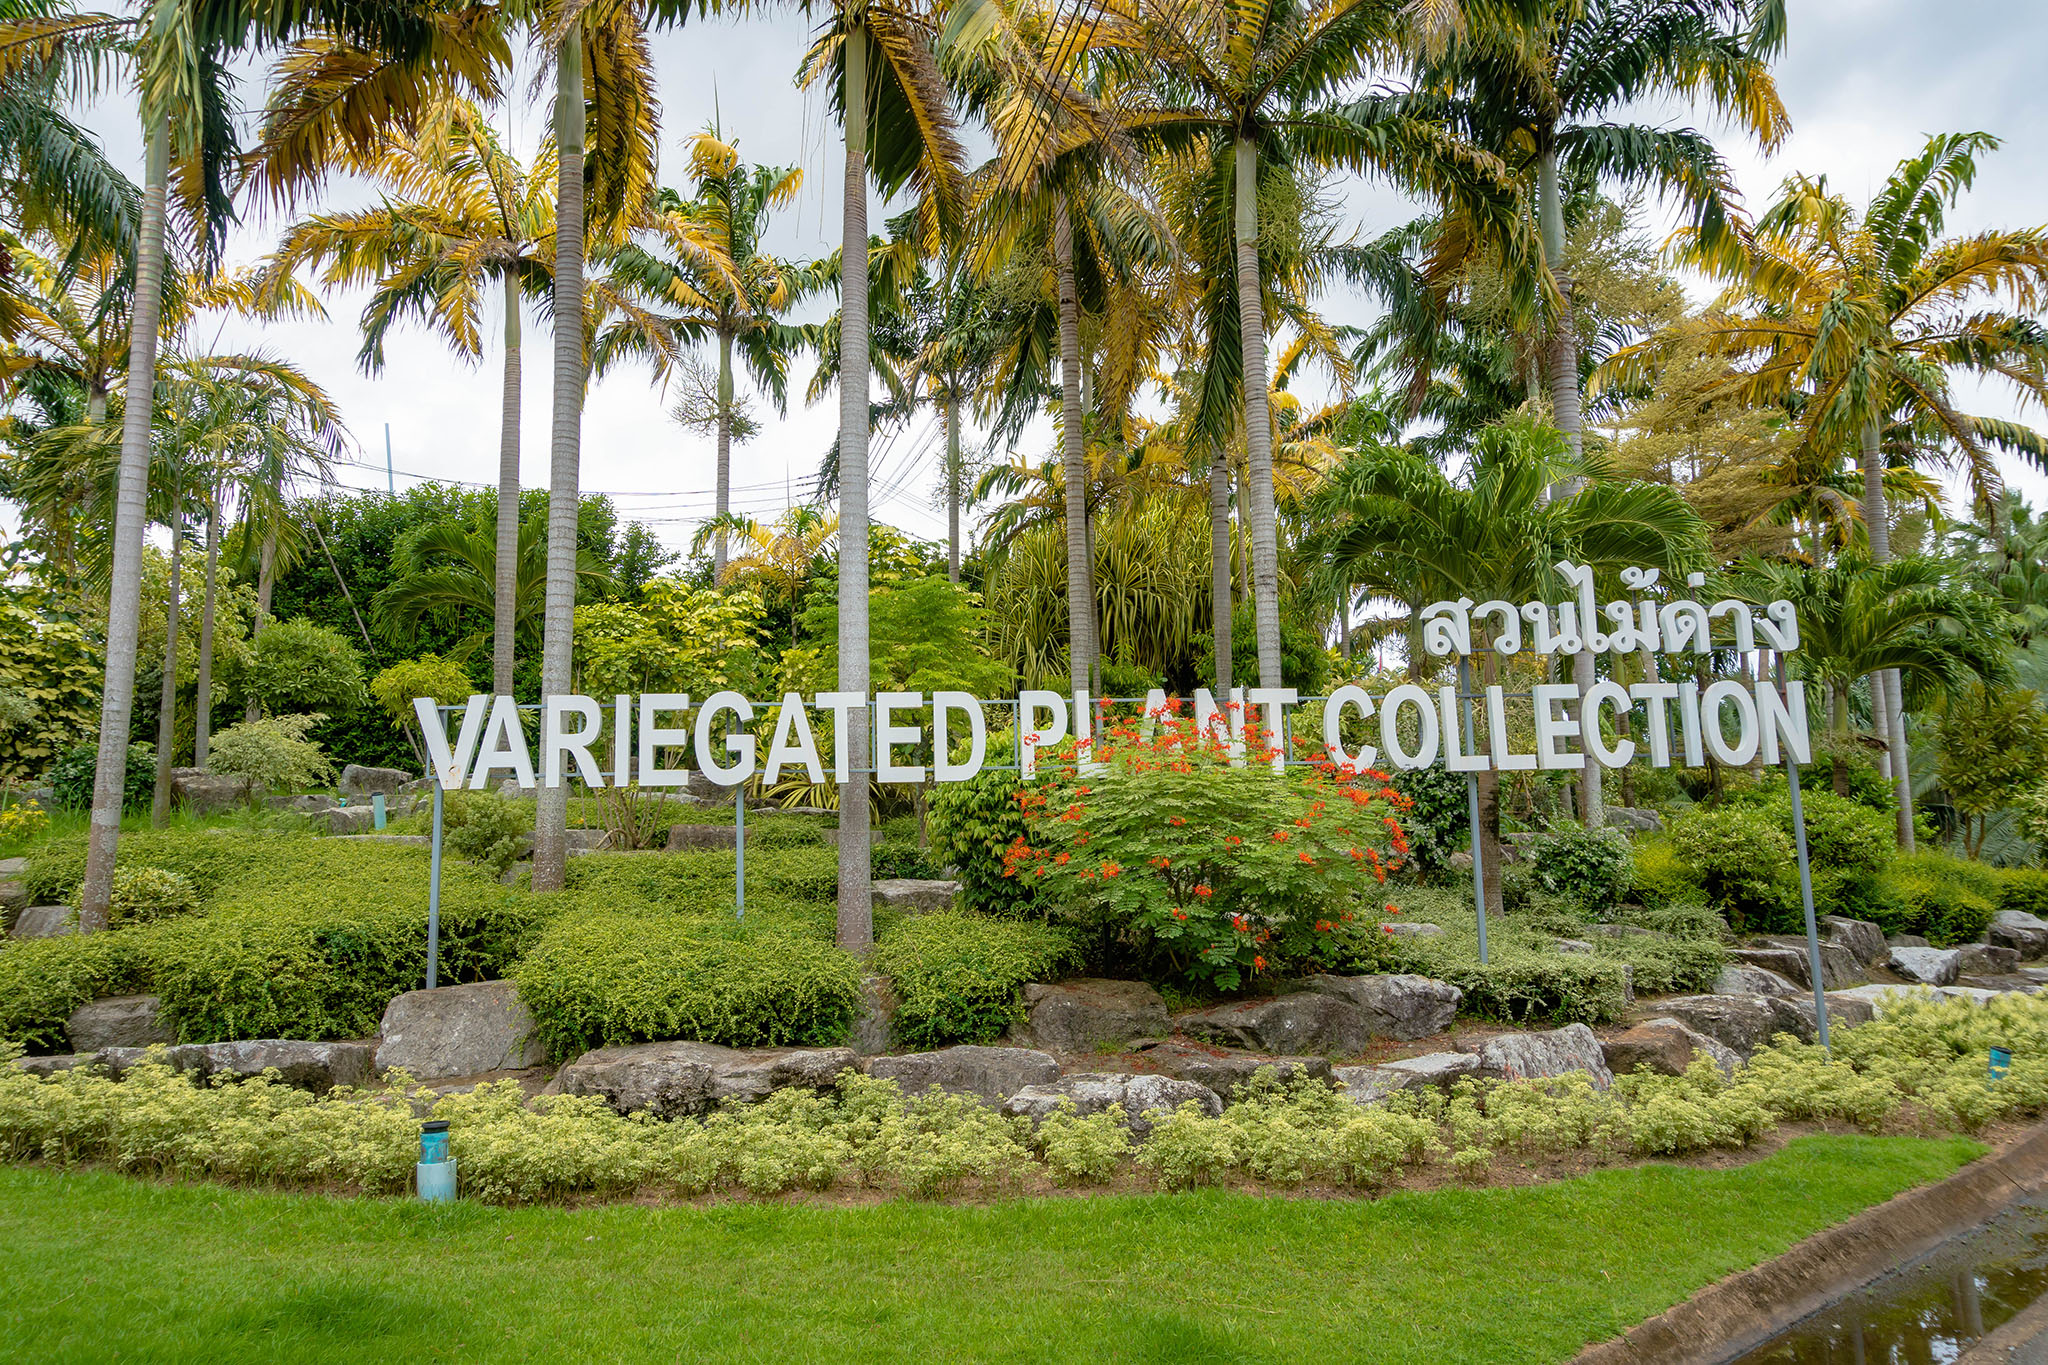 Variegated Plants Collection